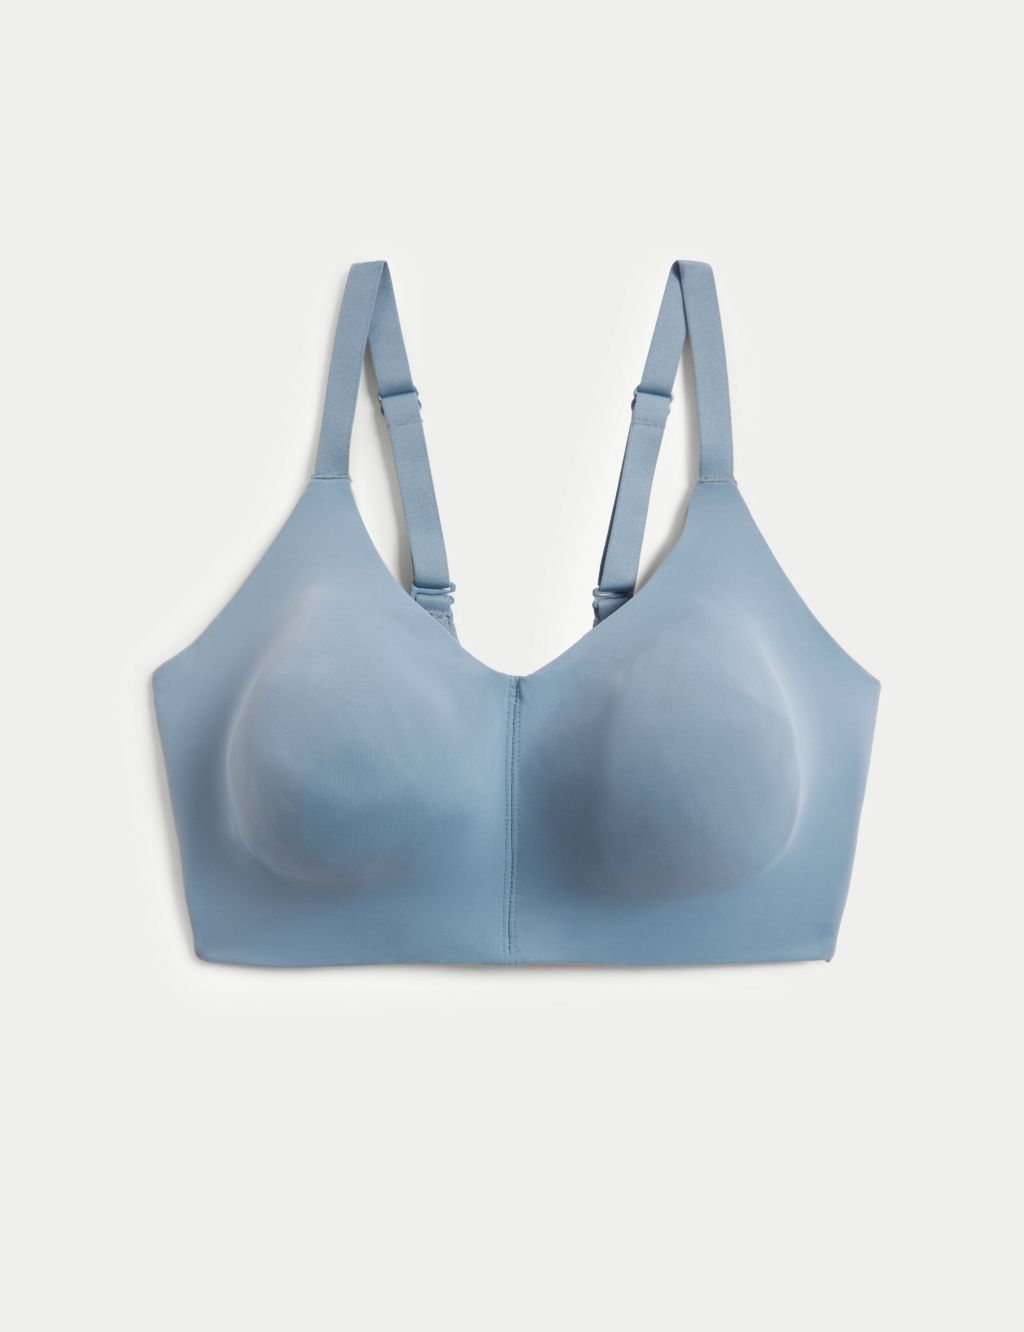 Flexifit™ Non-Wired Full Cup Bra F-H image 2